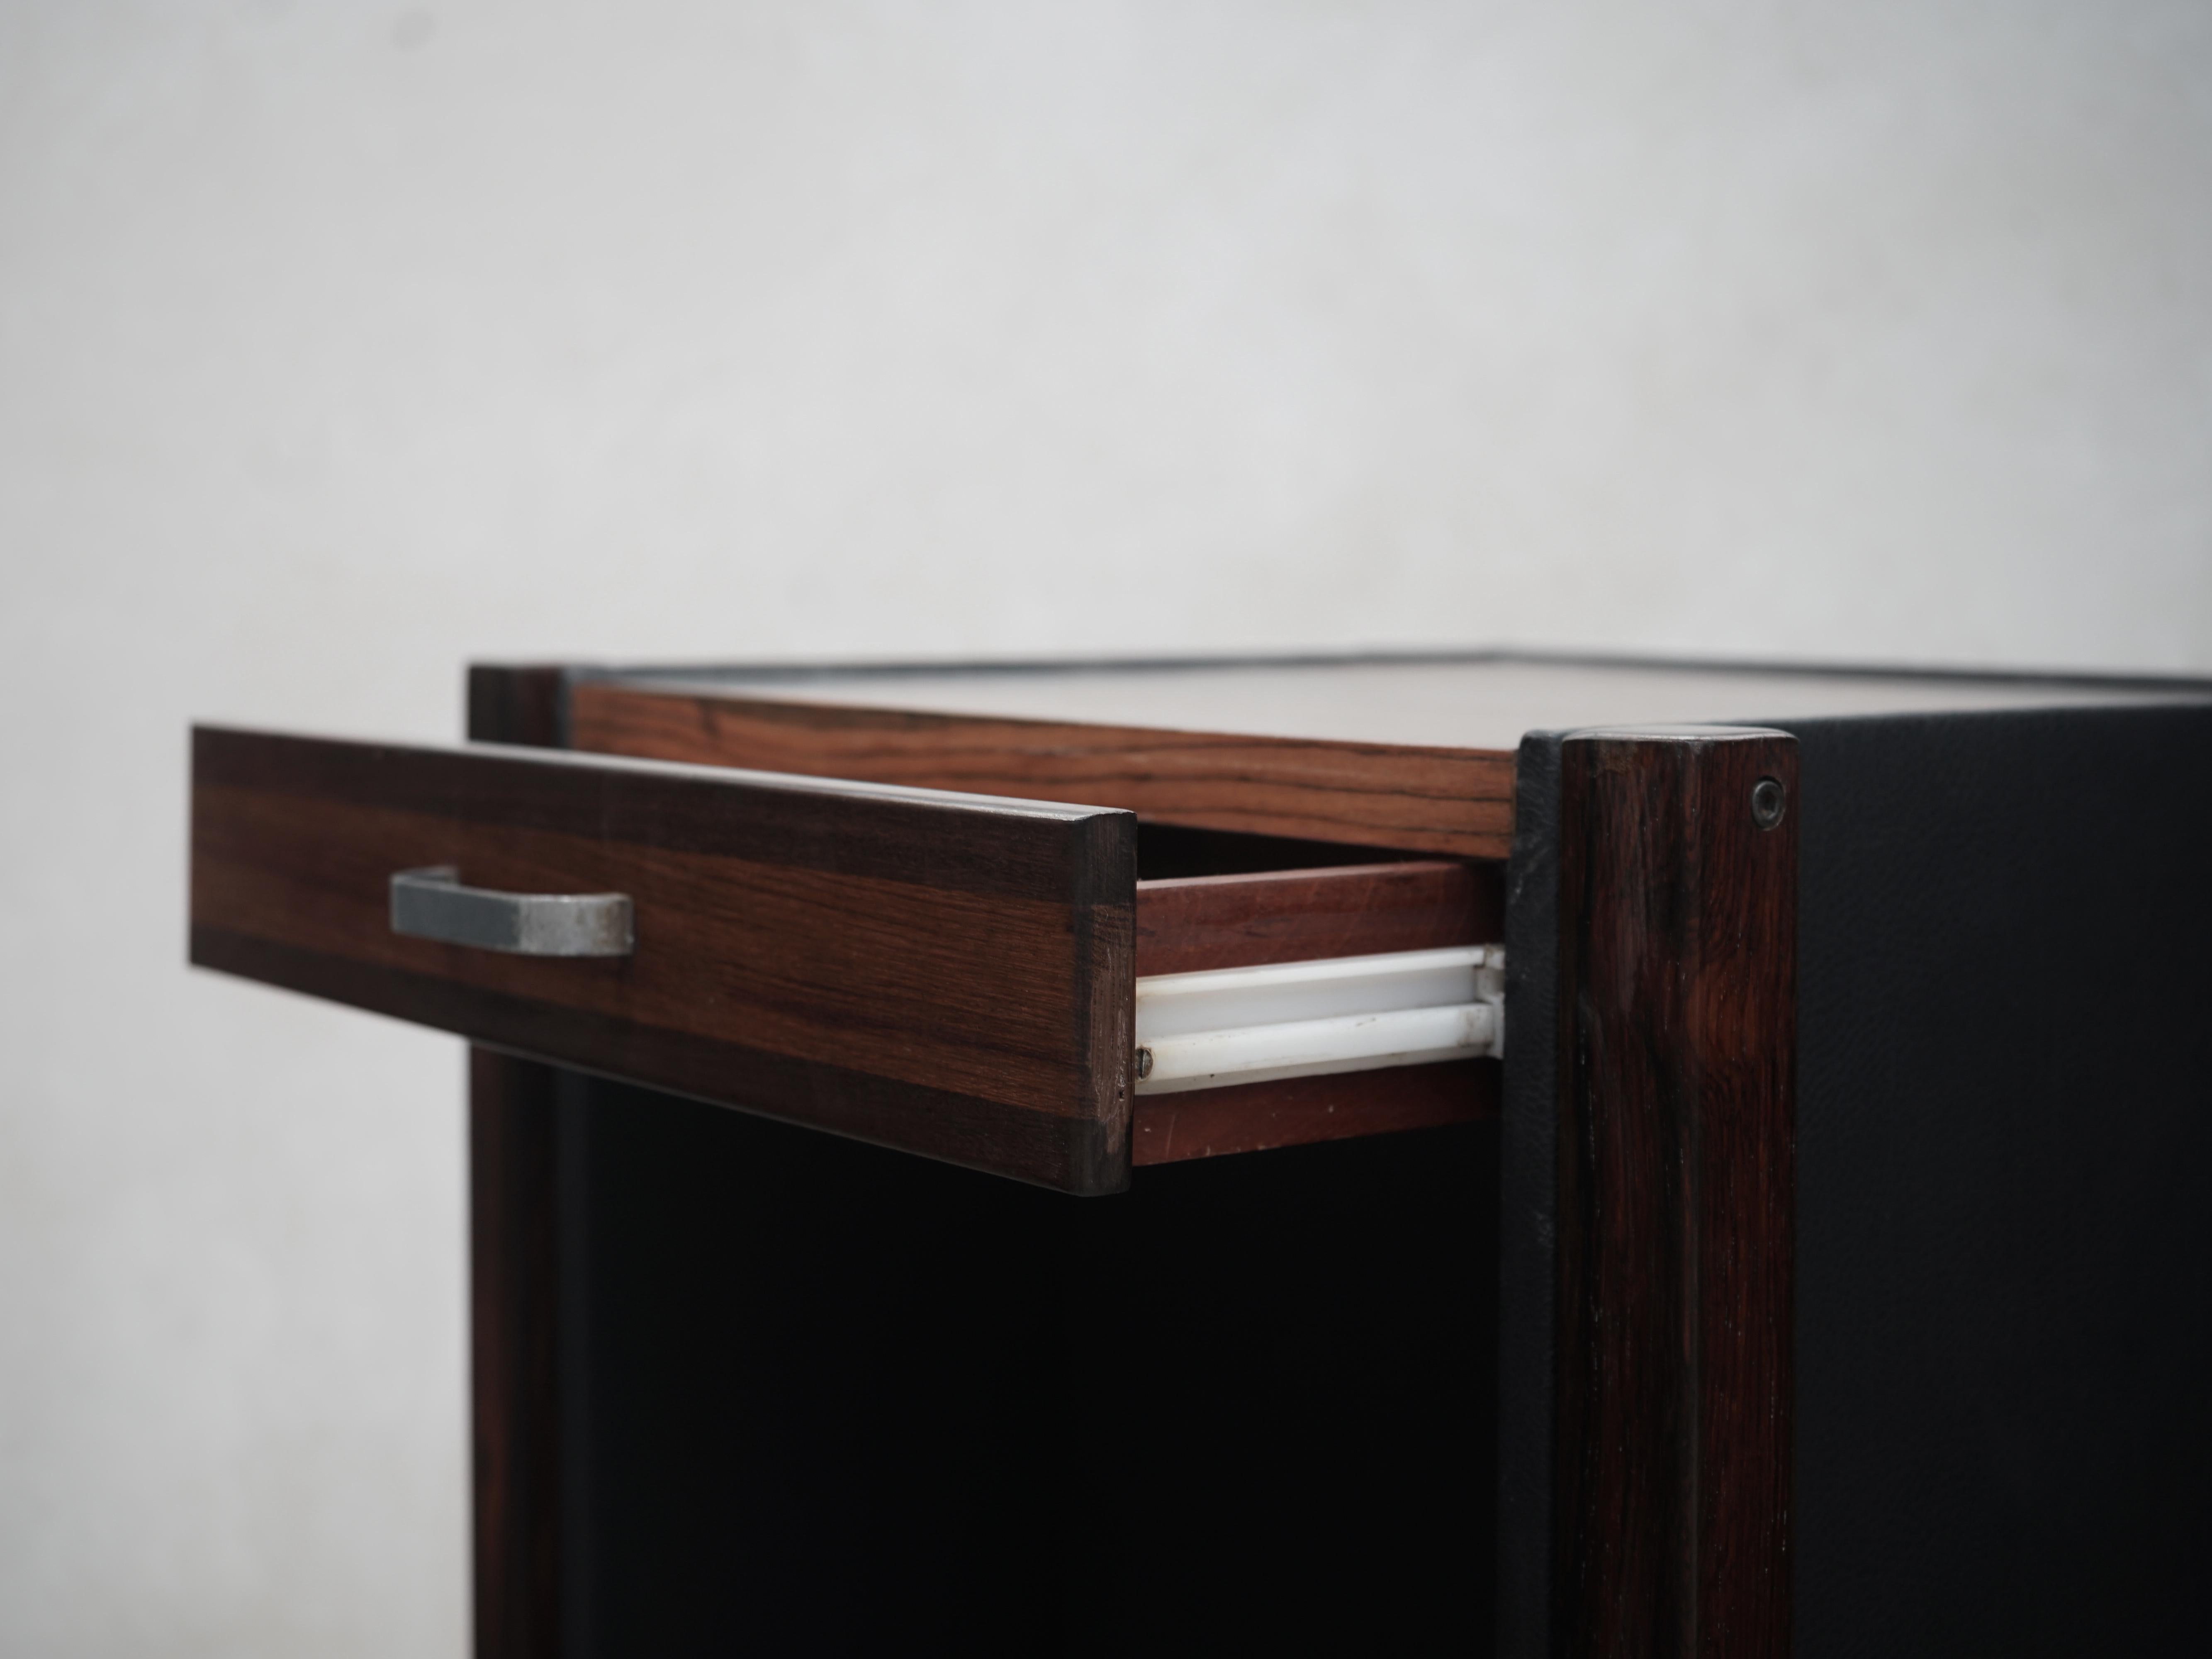 Rosewood Pair of End Tables by Jorge Zalszupin, Brazilian Midcentury Design, 1960s For Sale